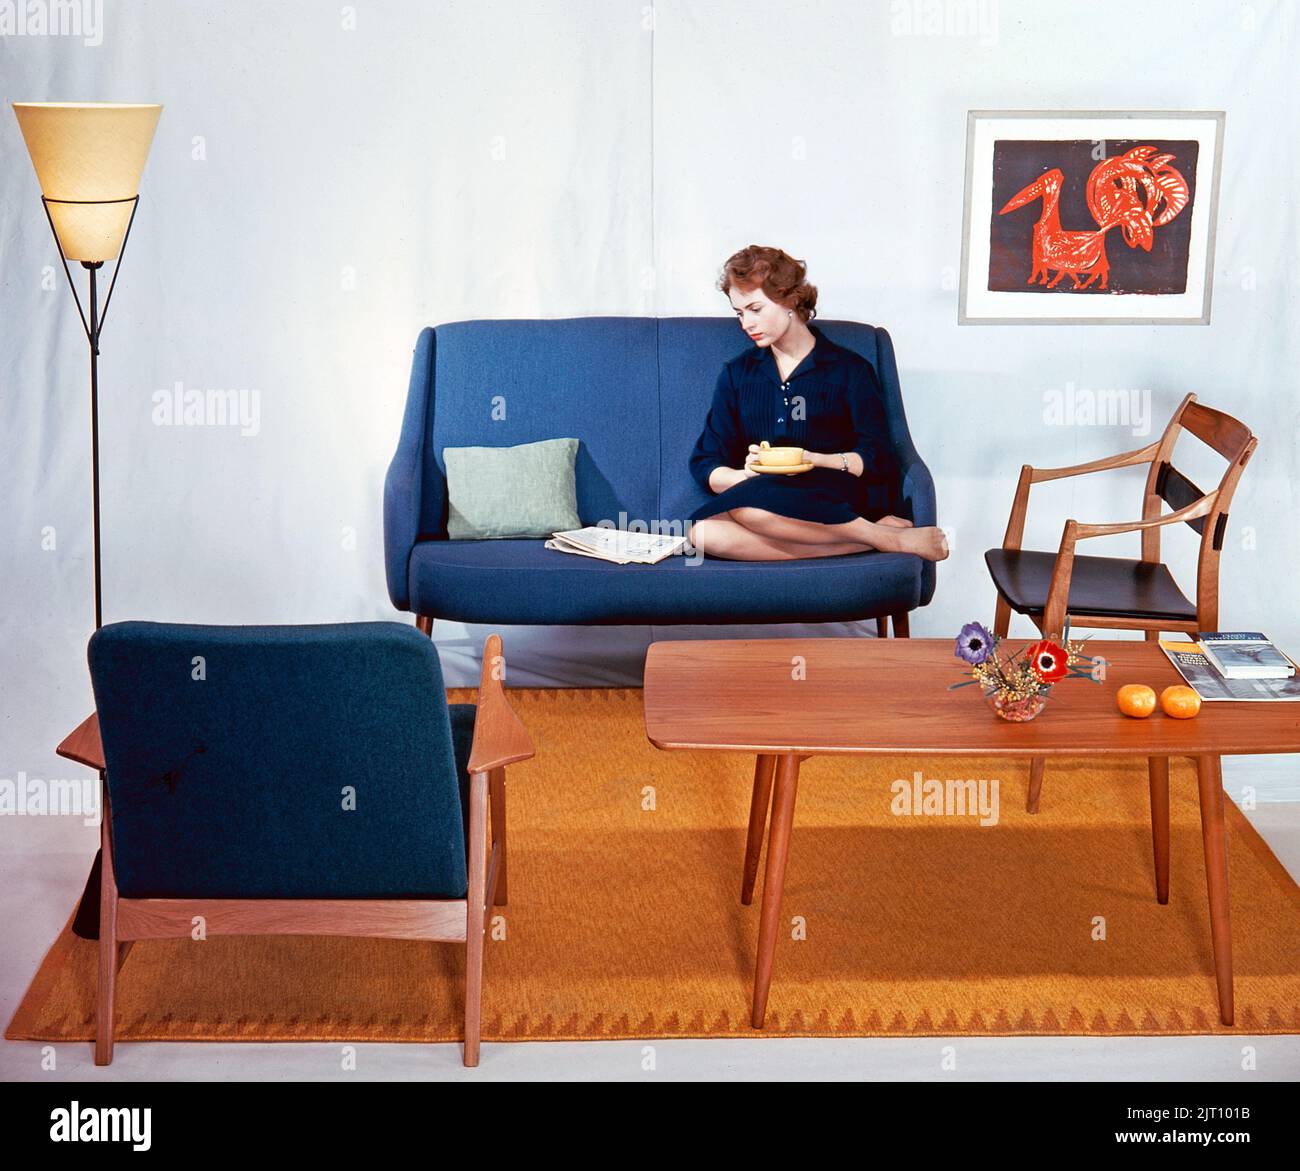 In the 1950s 1960s. A woman is sitting comfortably in a couch reading the newspaper and having a cup of tea. The furniture are made of wood and typical of the late 1950s early 1960s style.  Sweden 1958 Conard ref BV109-6 Stock Photo